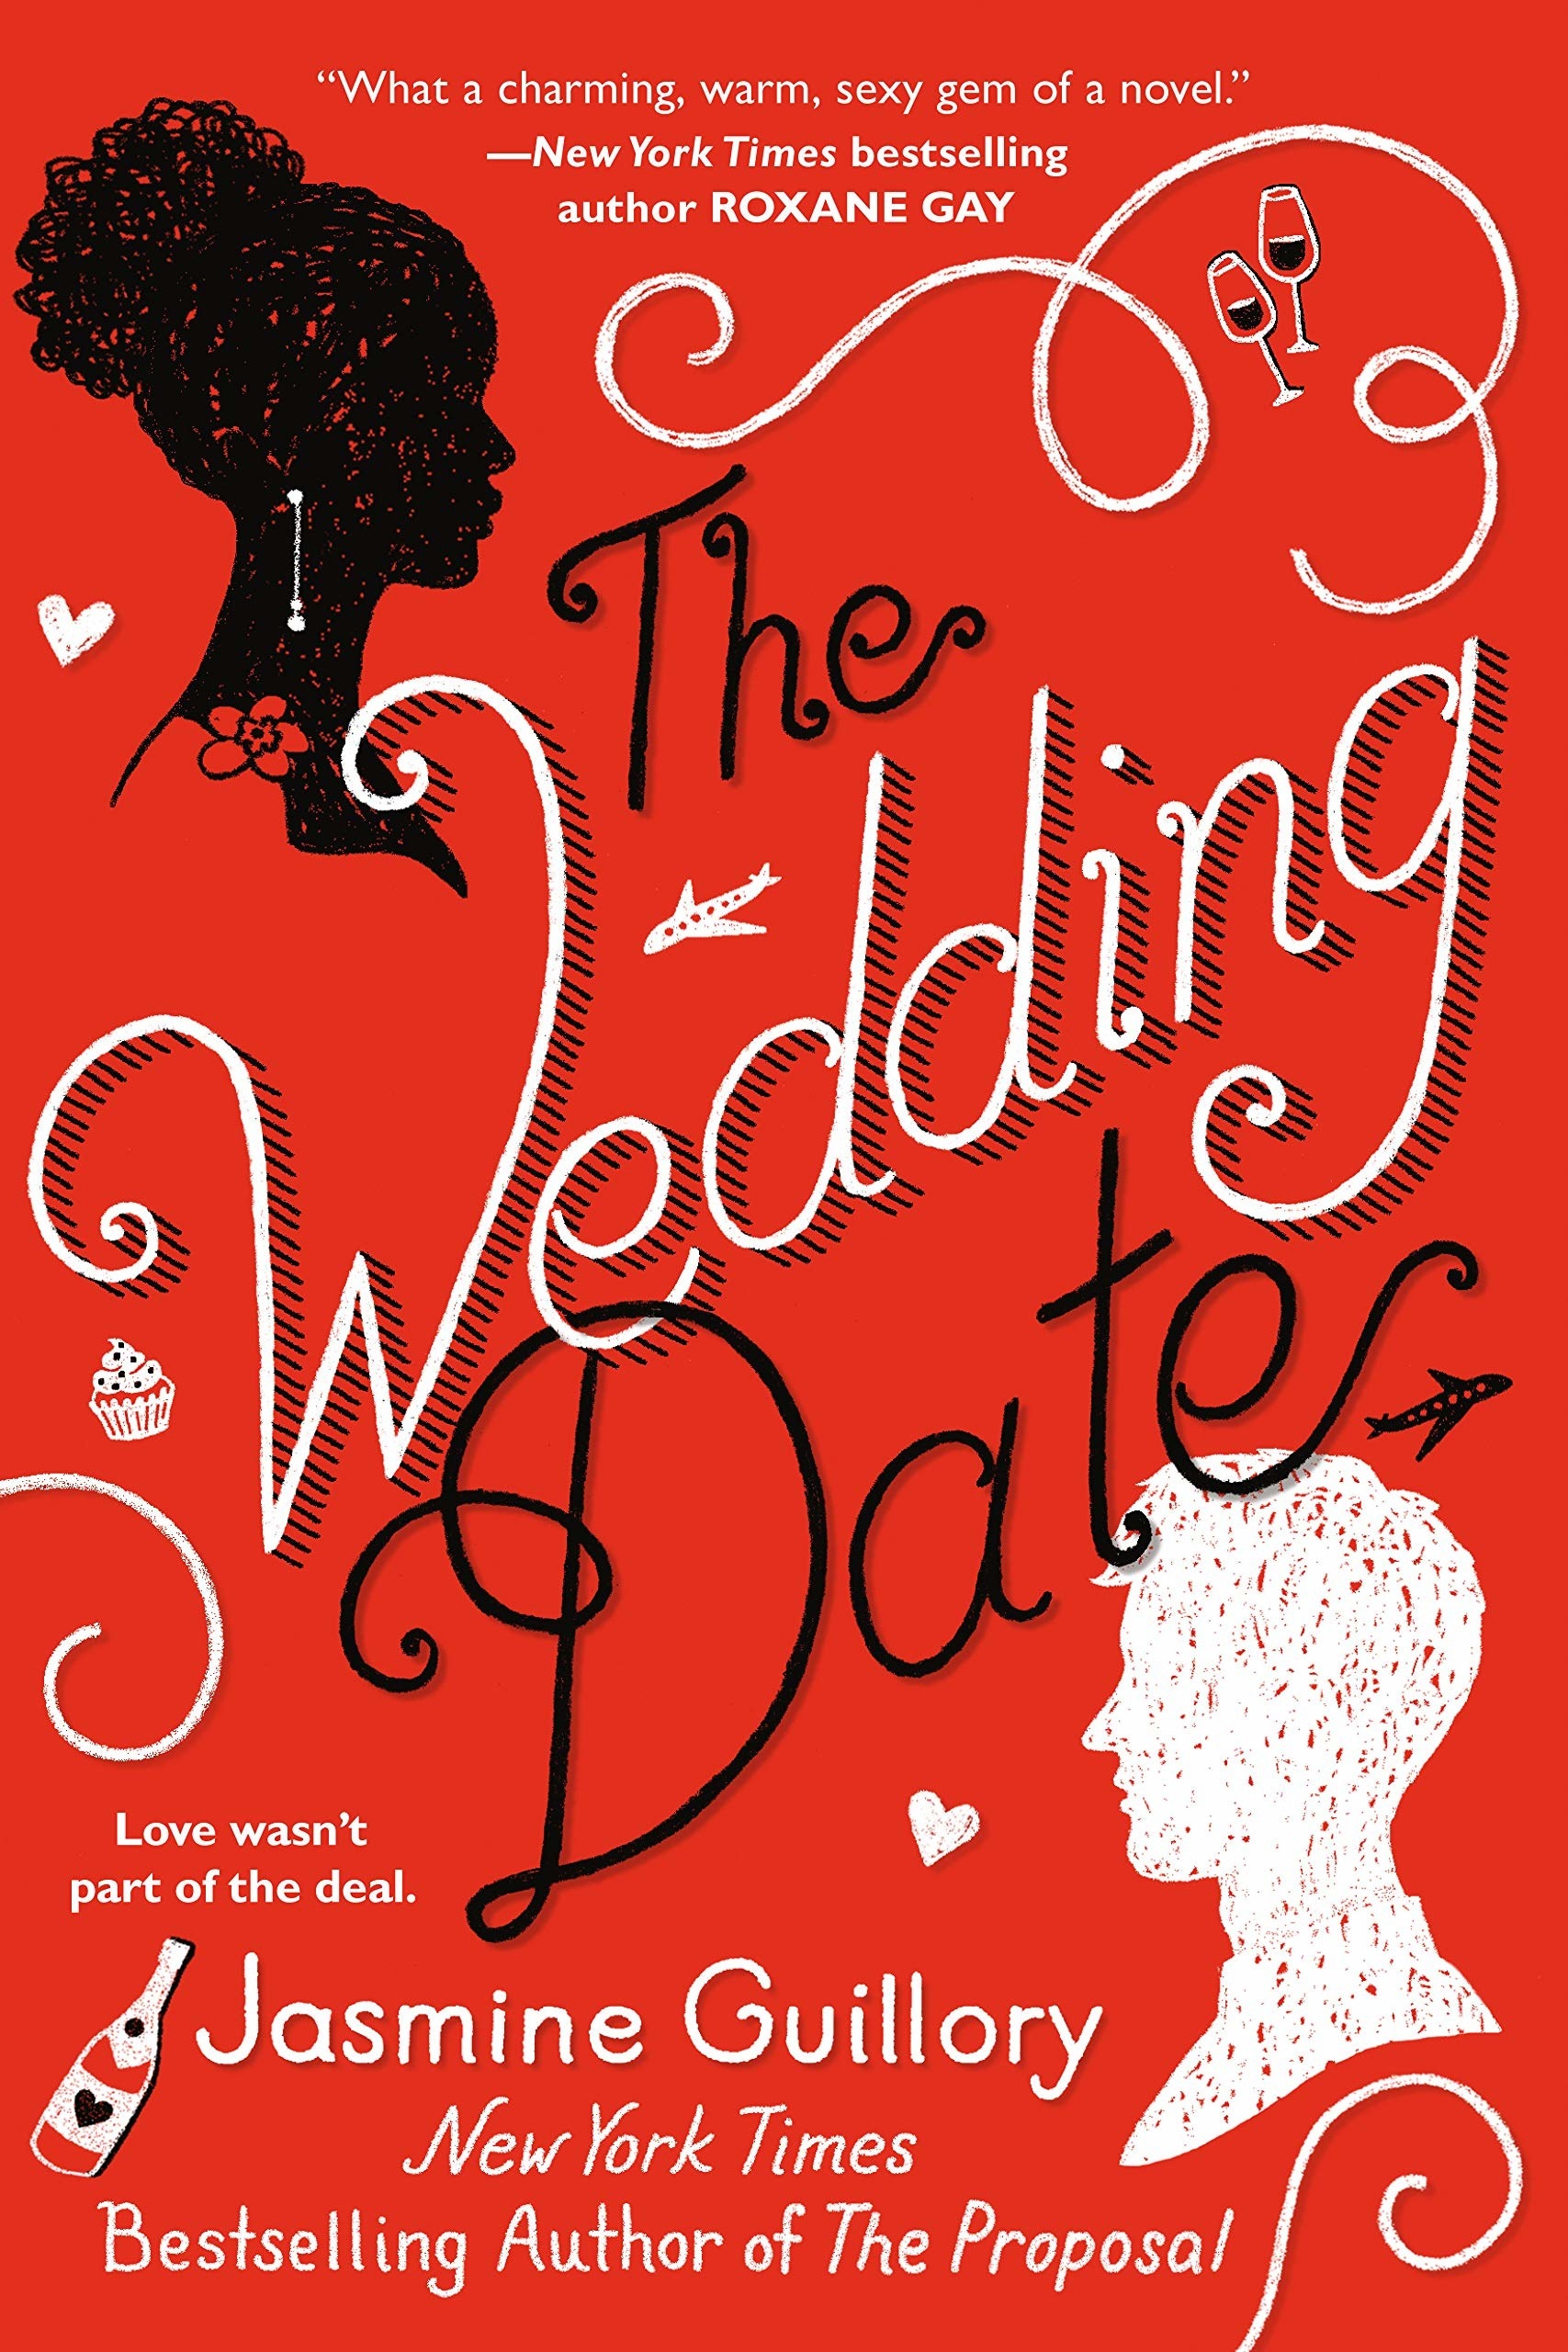 A red book cover with a Black woman and a white man that reads The Wedding Date